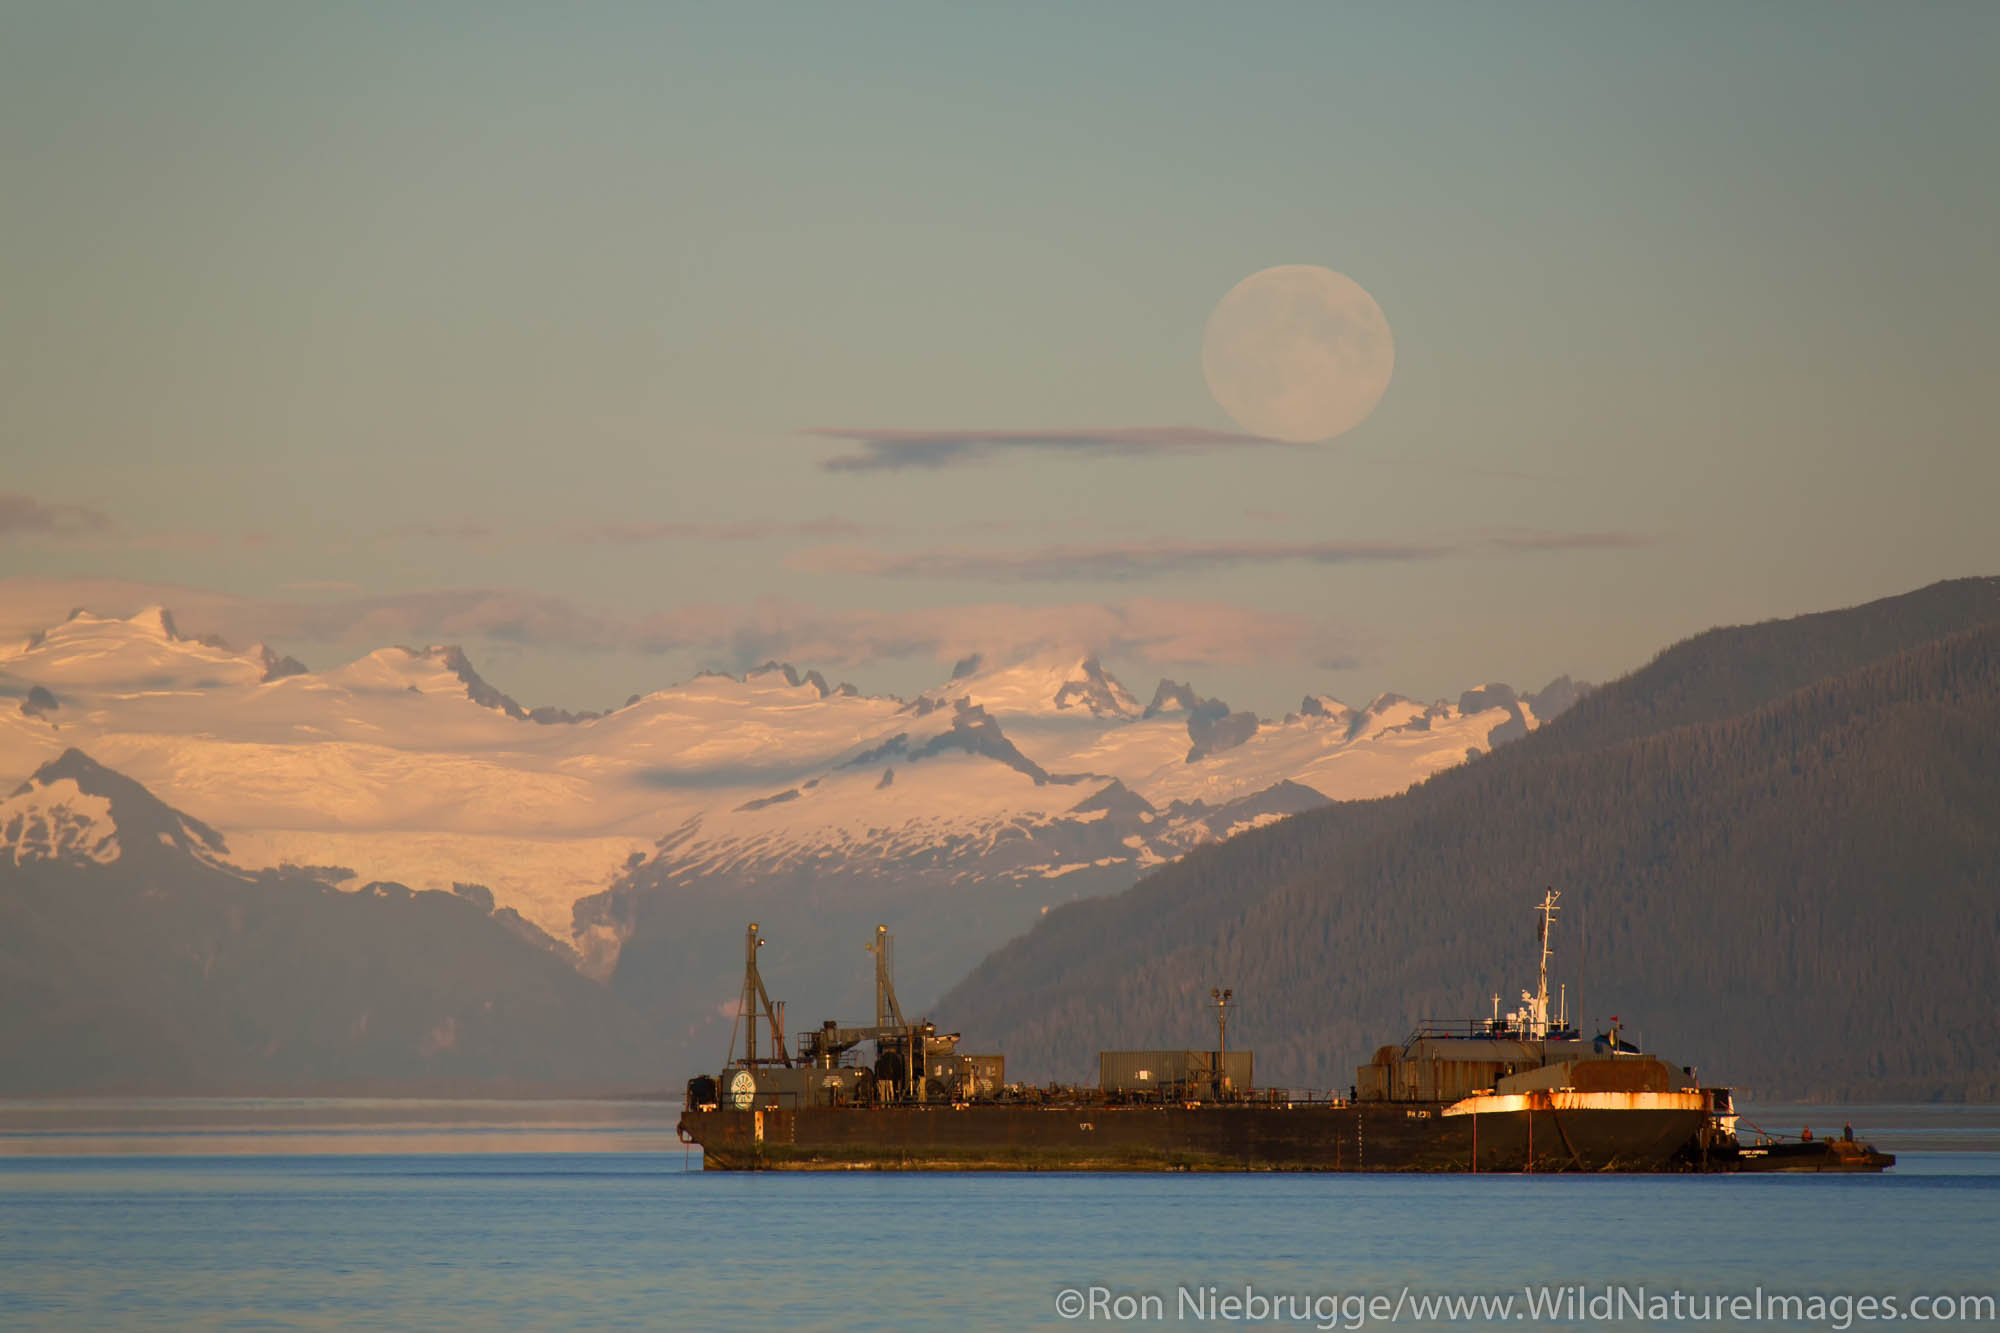 Petro Marine Services barge, Tongass National Forest, Alaska.